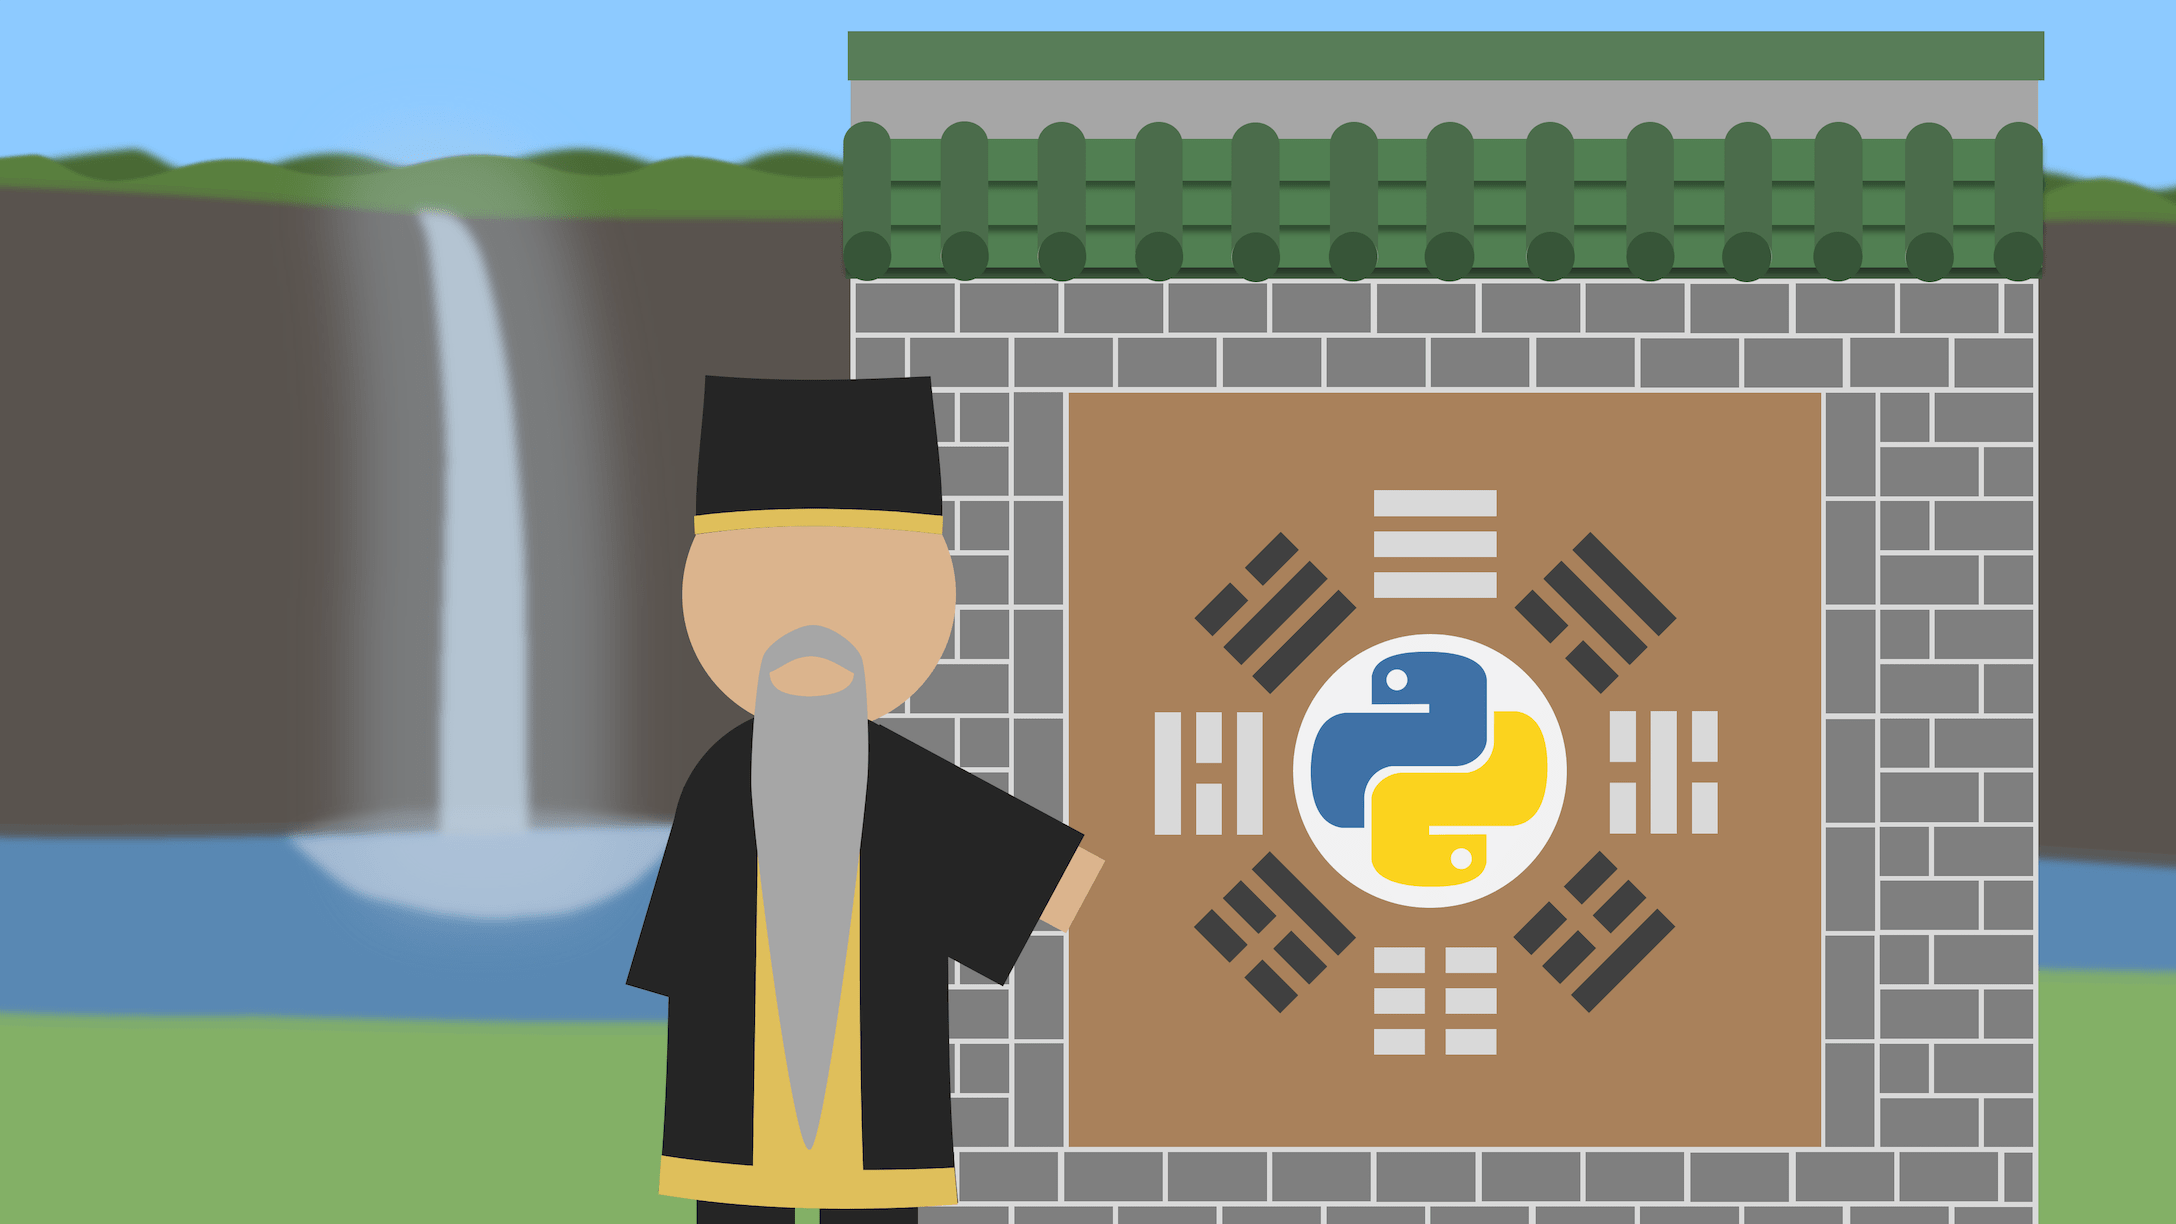 An enlightened Python master teaches disciples about the zen of Python